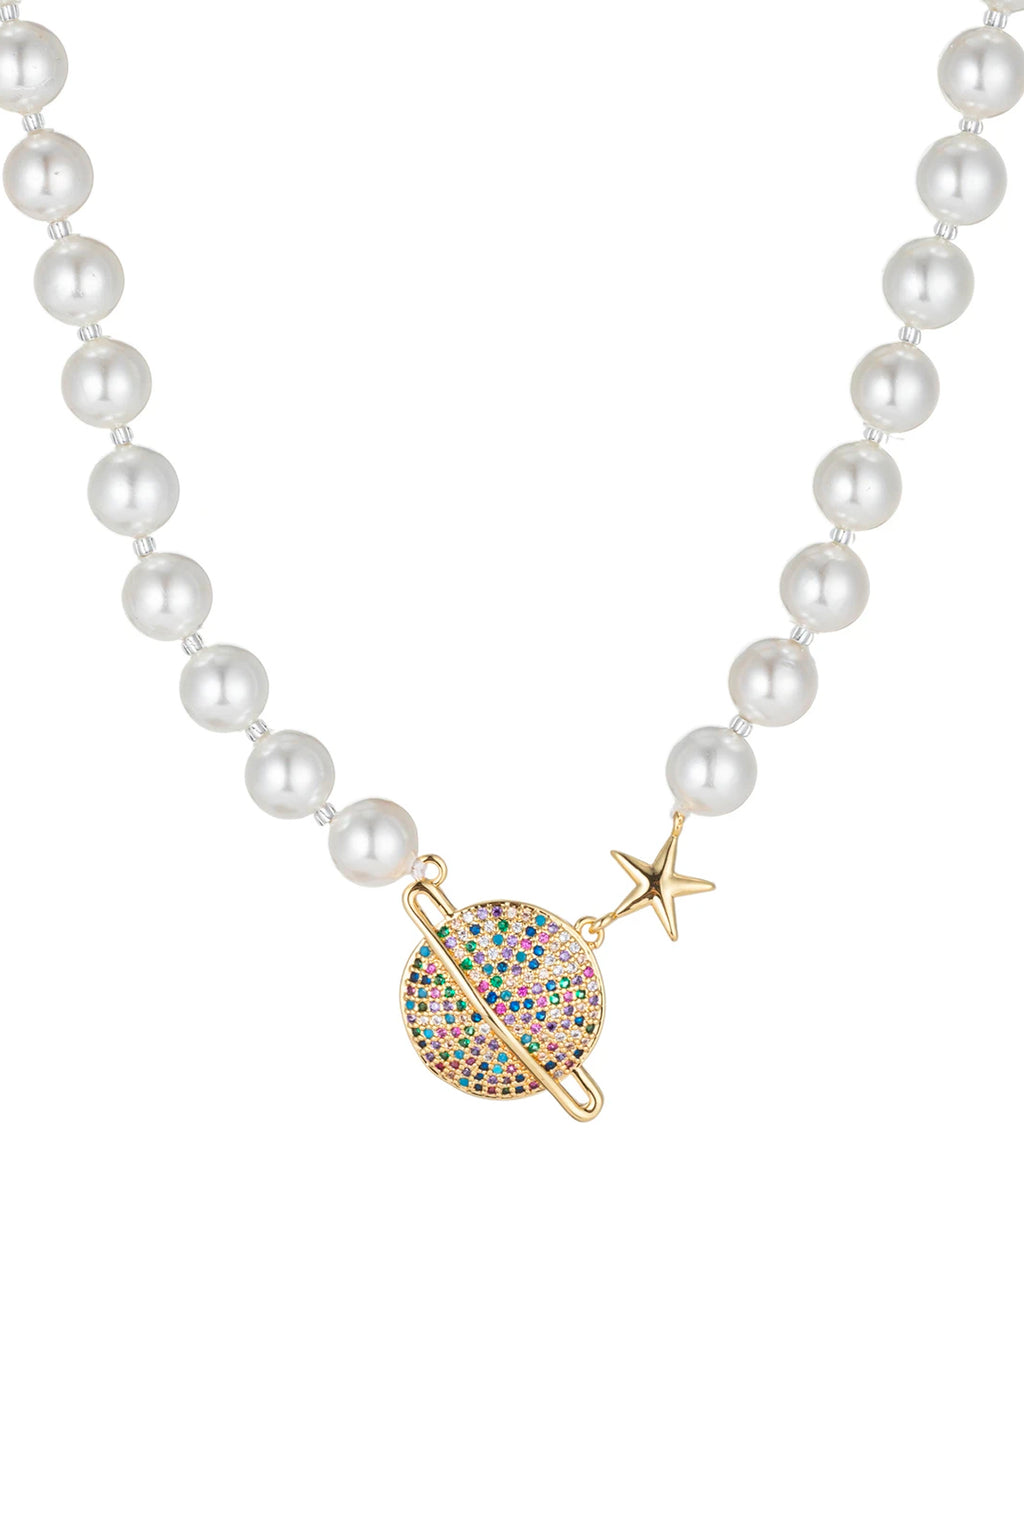 Shell pearl necklace with a mars pendant studded with CZ crystals.